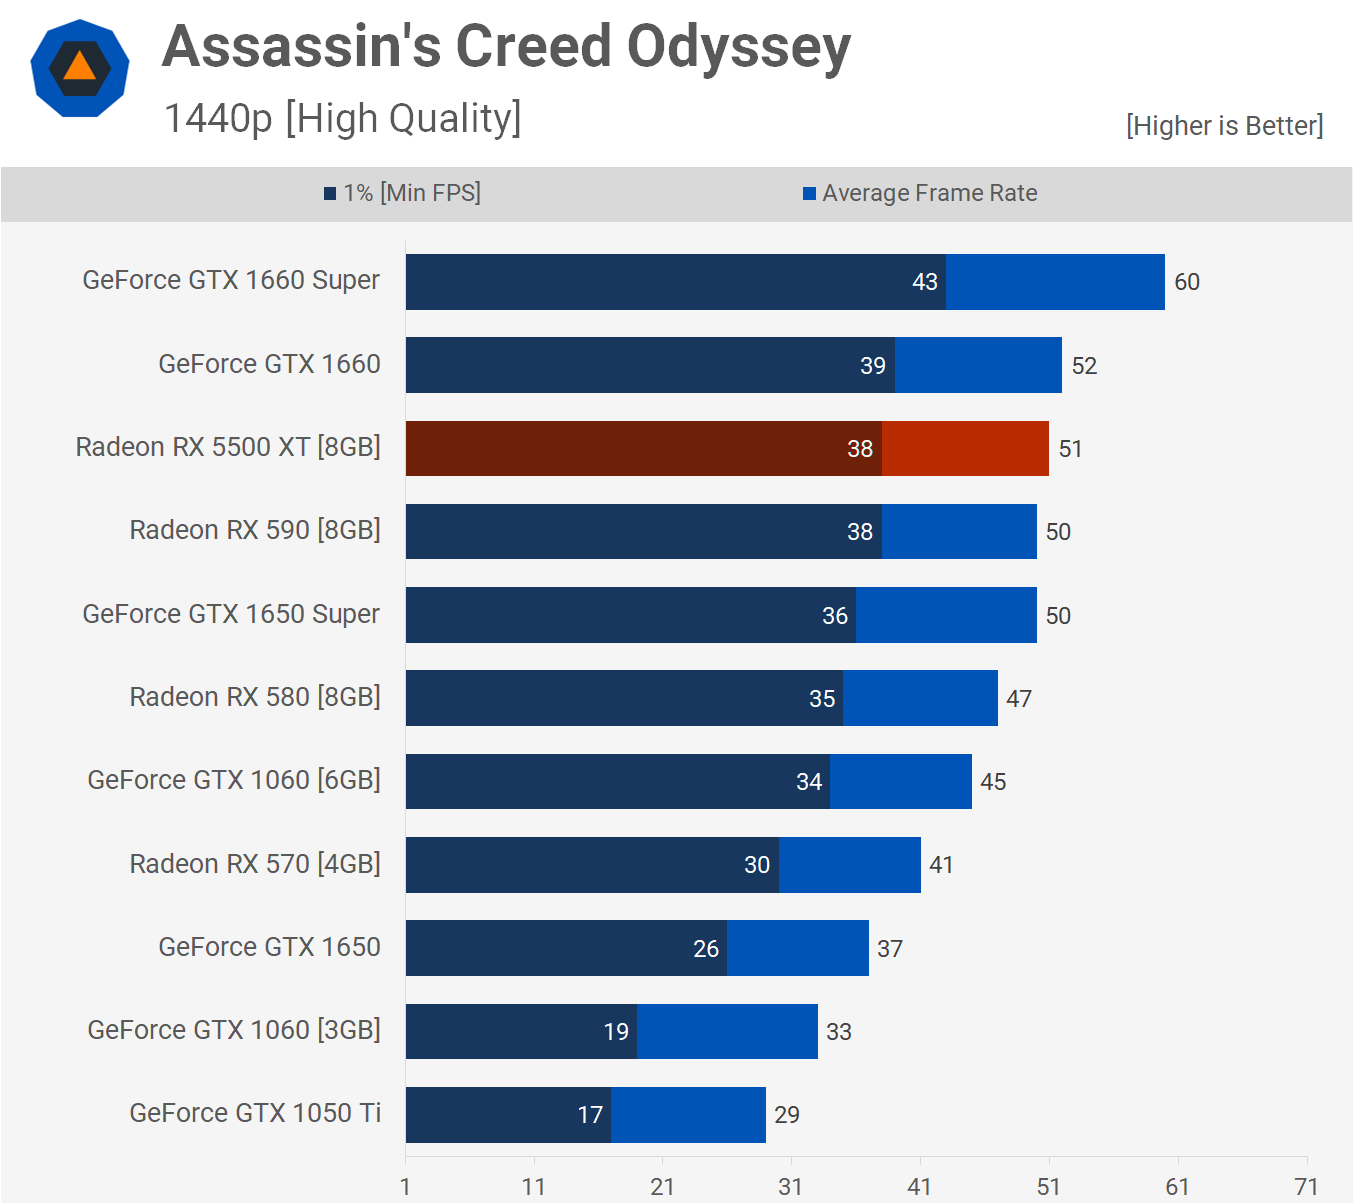 Assassin's Creed Odyssey 1440p